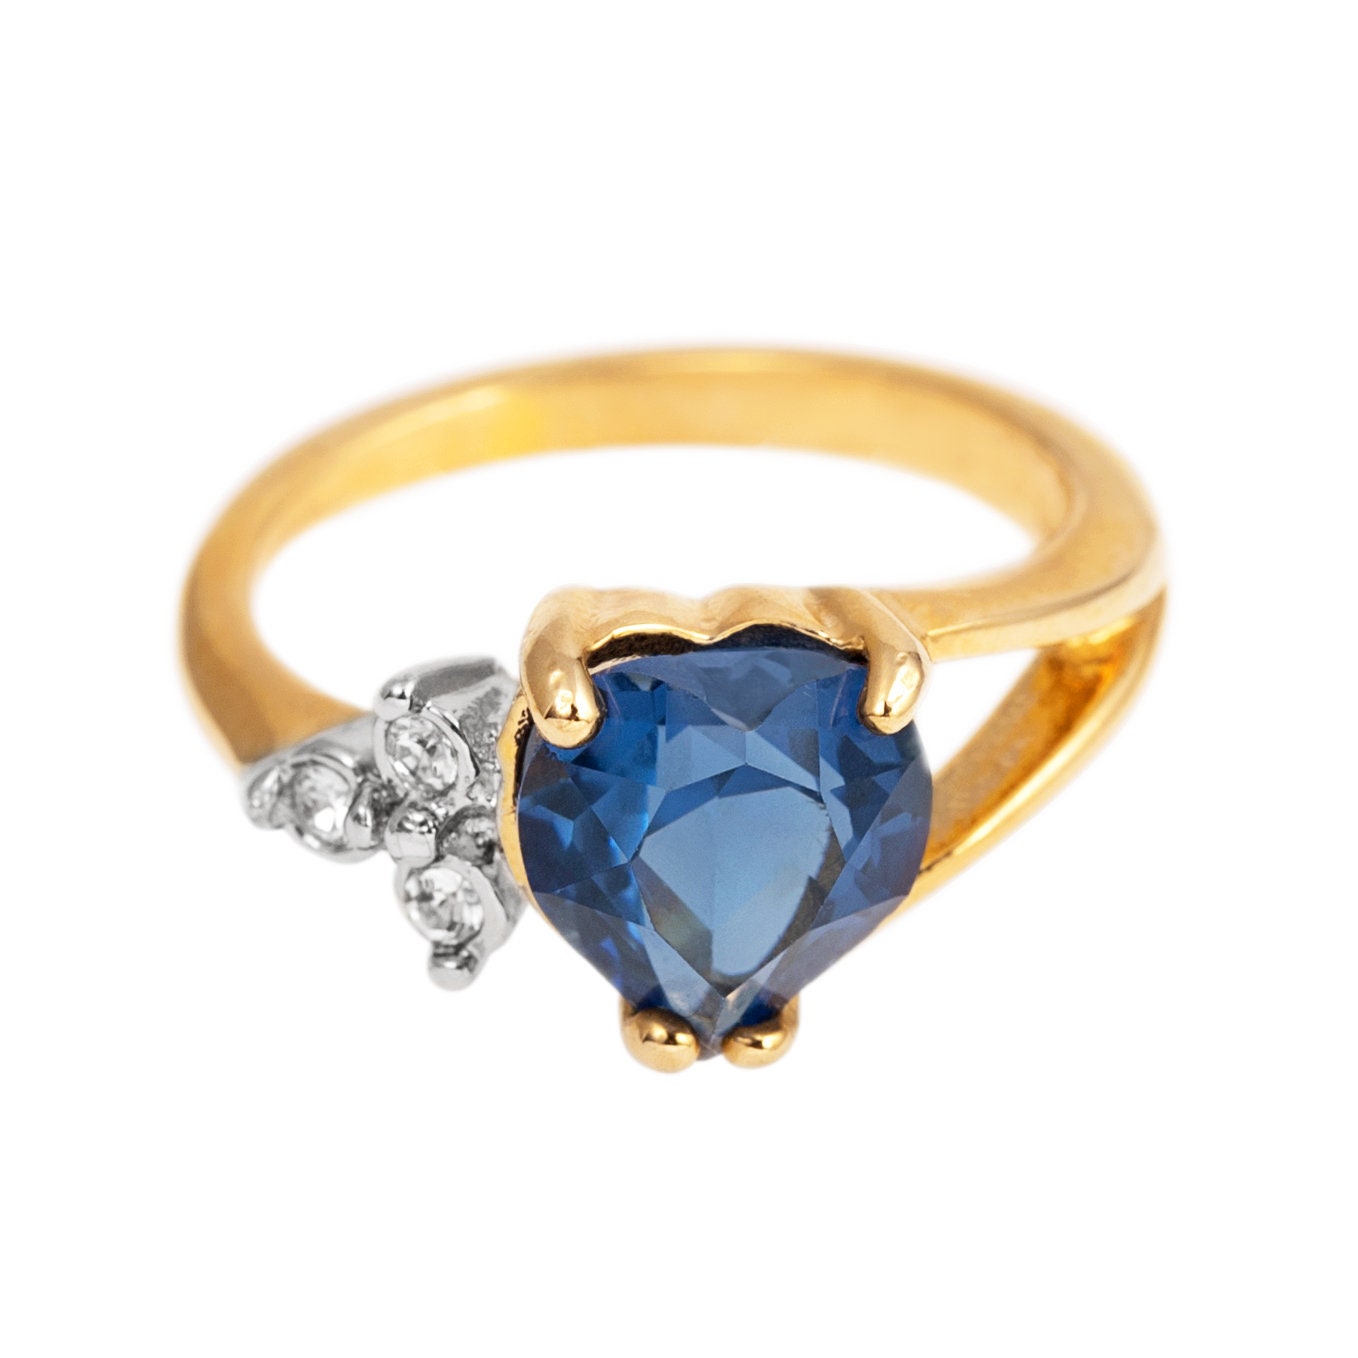 Vintage Ring Sapphire Cubic Zirconia and Clear Austrian Crystals 18kt Yellow Gold Electroplated Made in USA Size 4